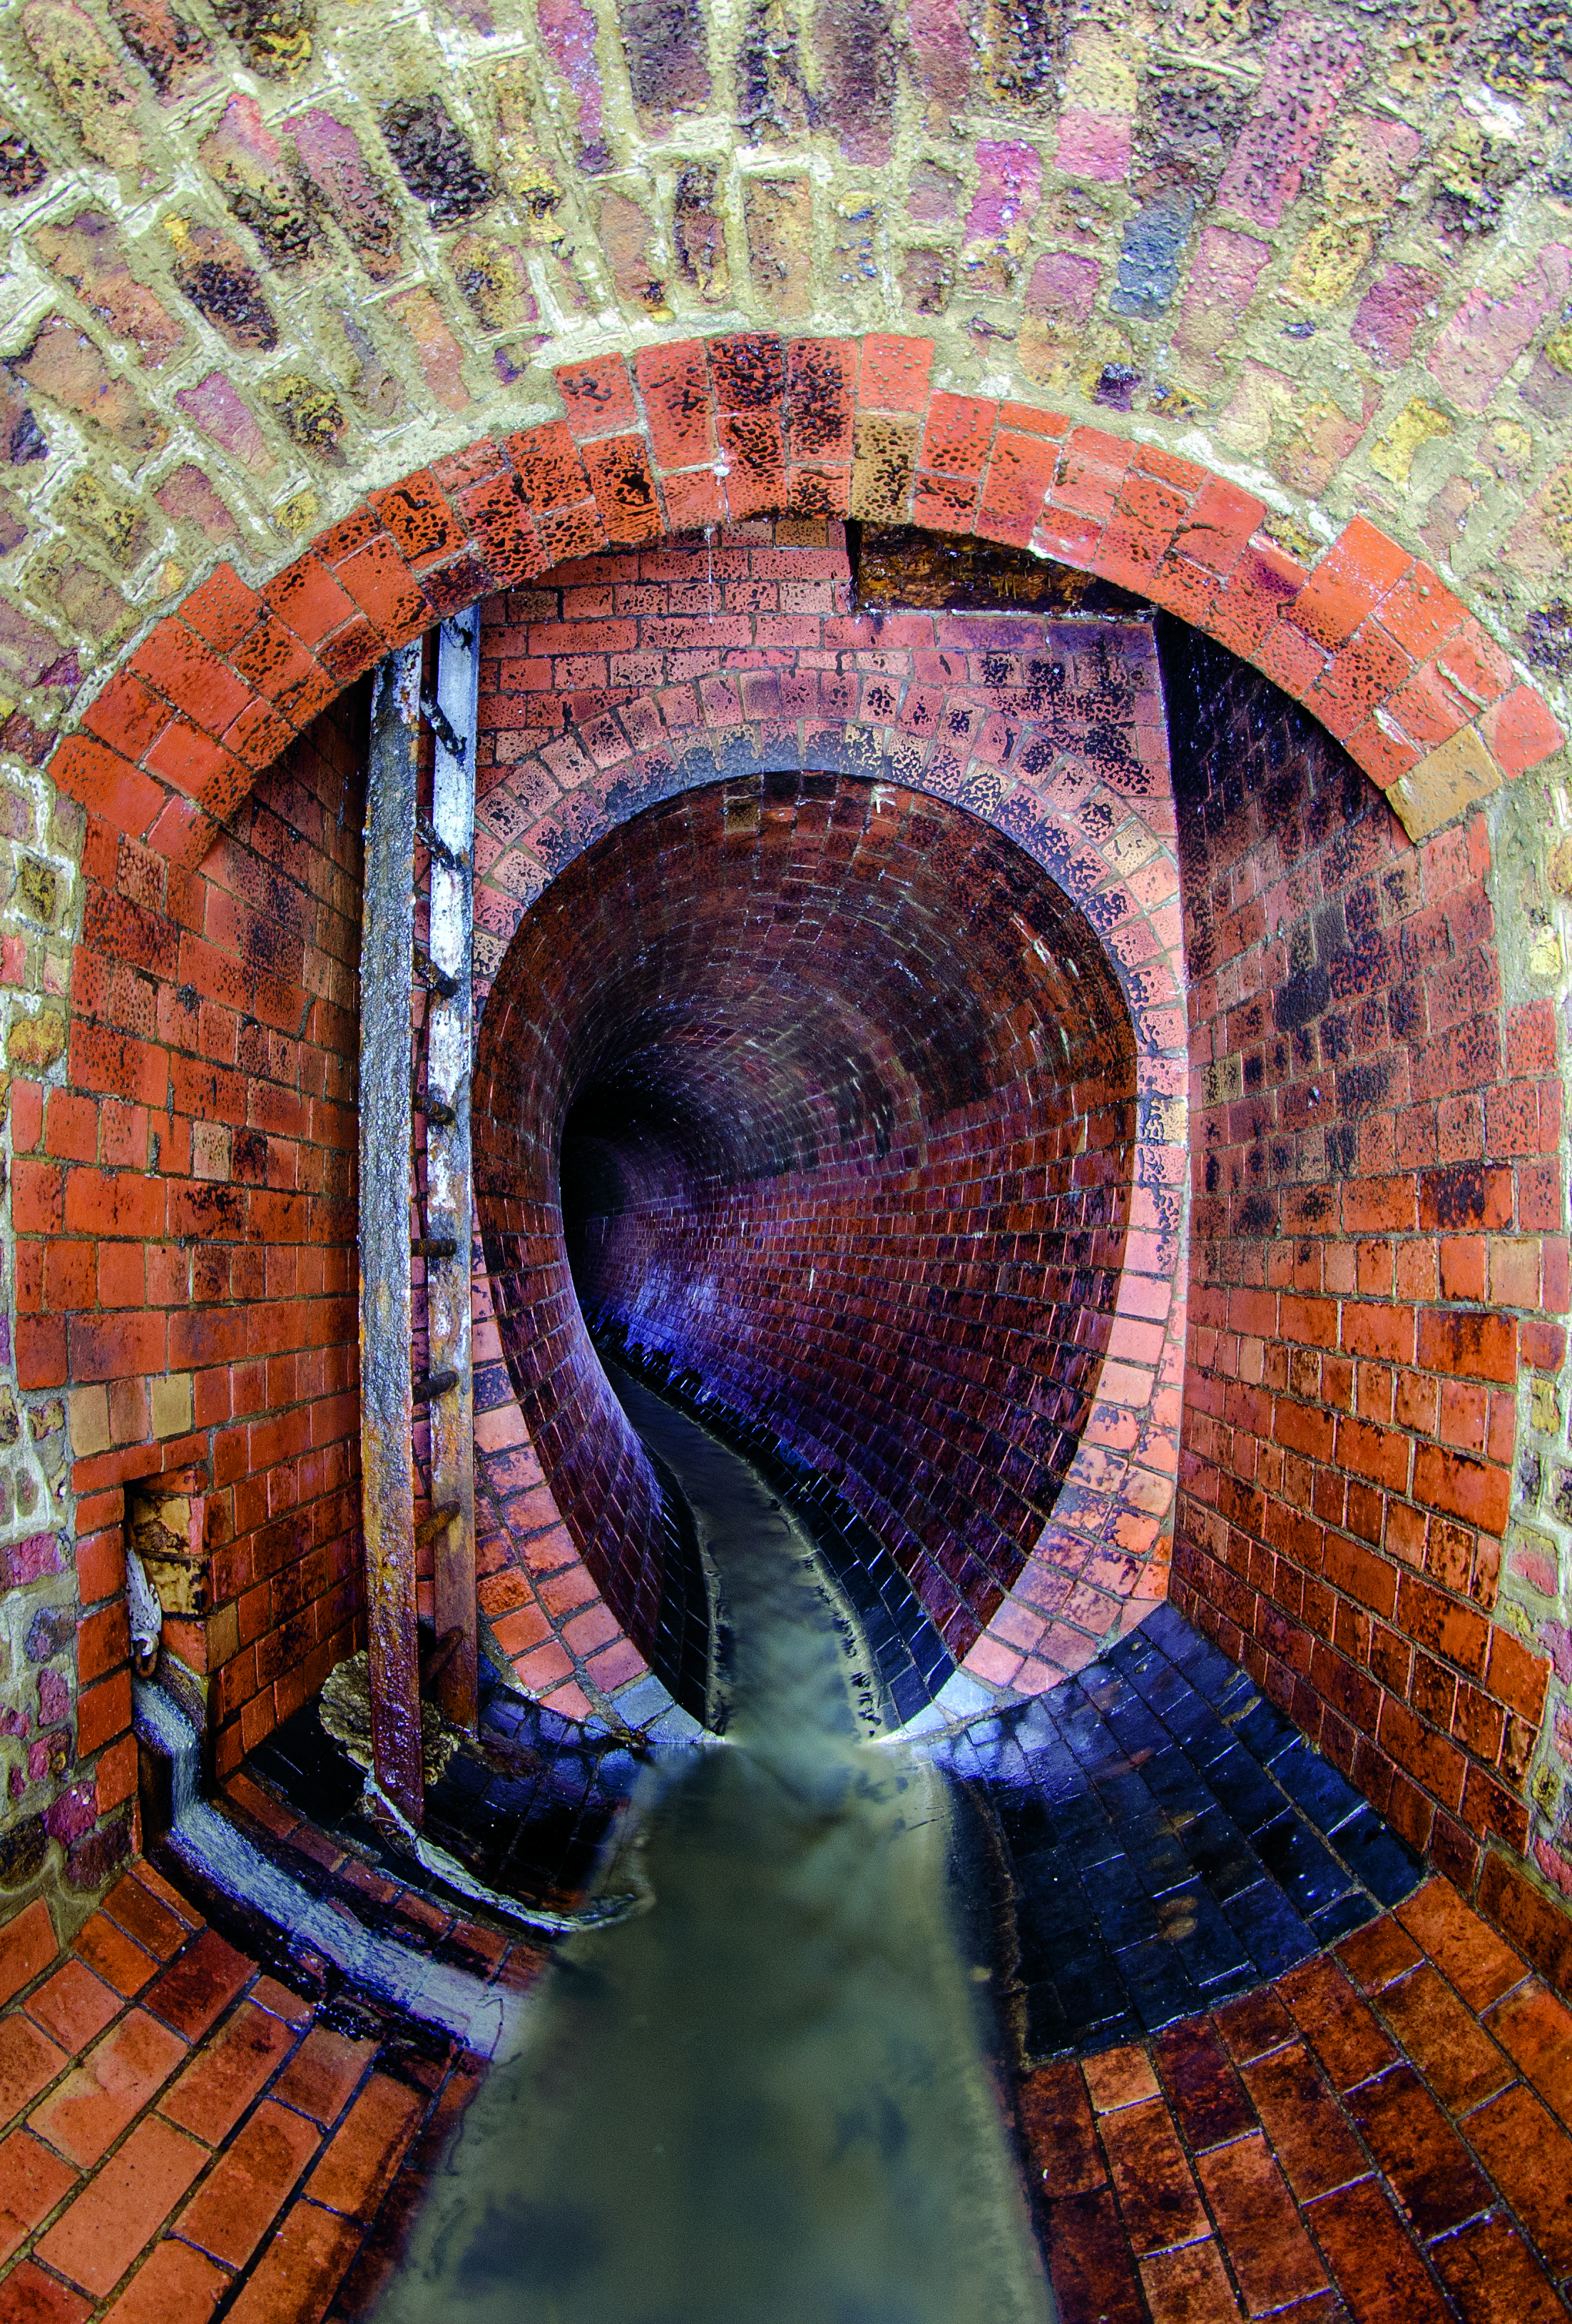 This undated photo was taken in King’s Scholars’ Pond Sewer in London, UK. (Adam Powell)